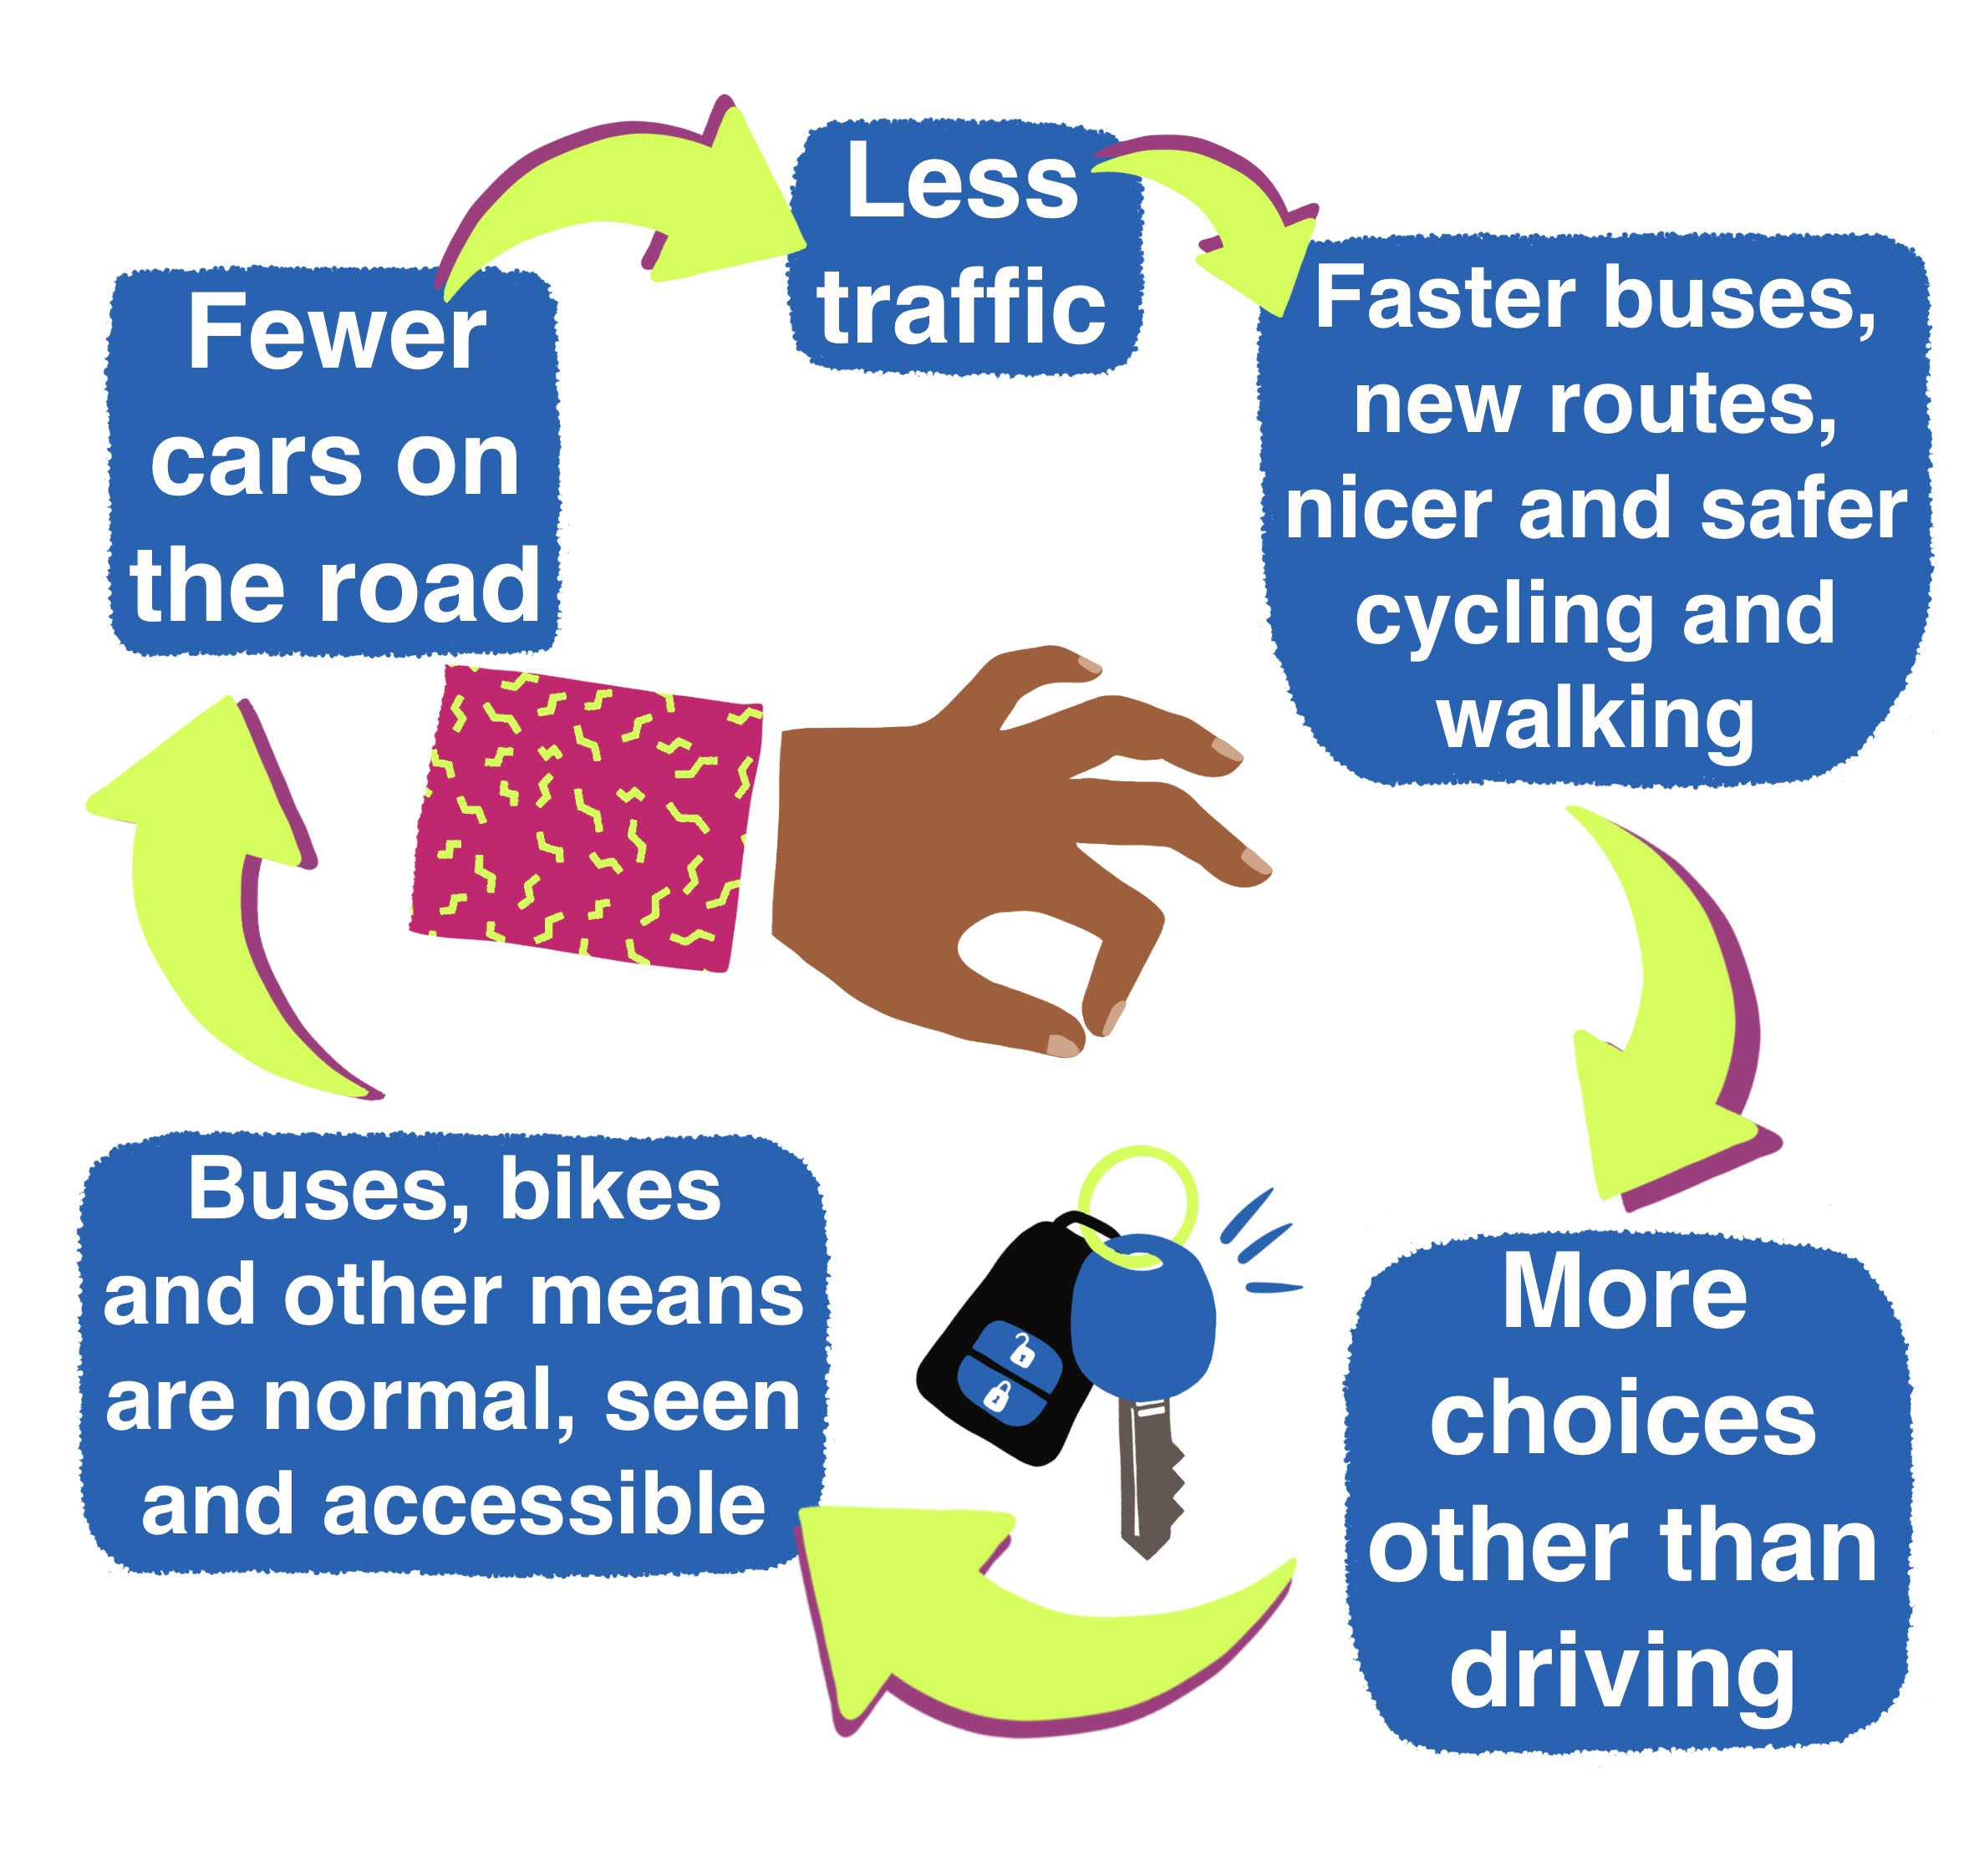 An image of a positive cycle – driving less and less makes things better